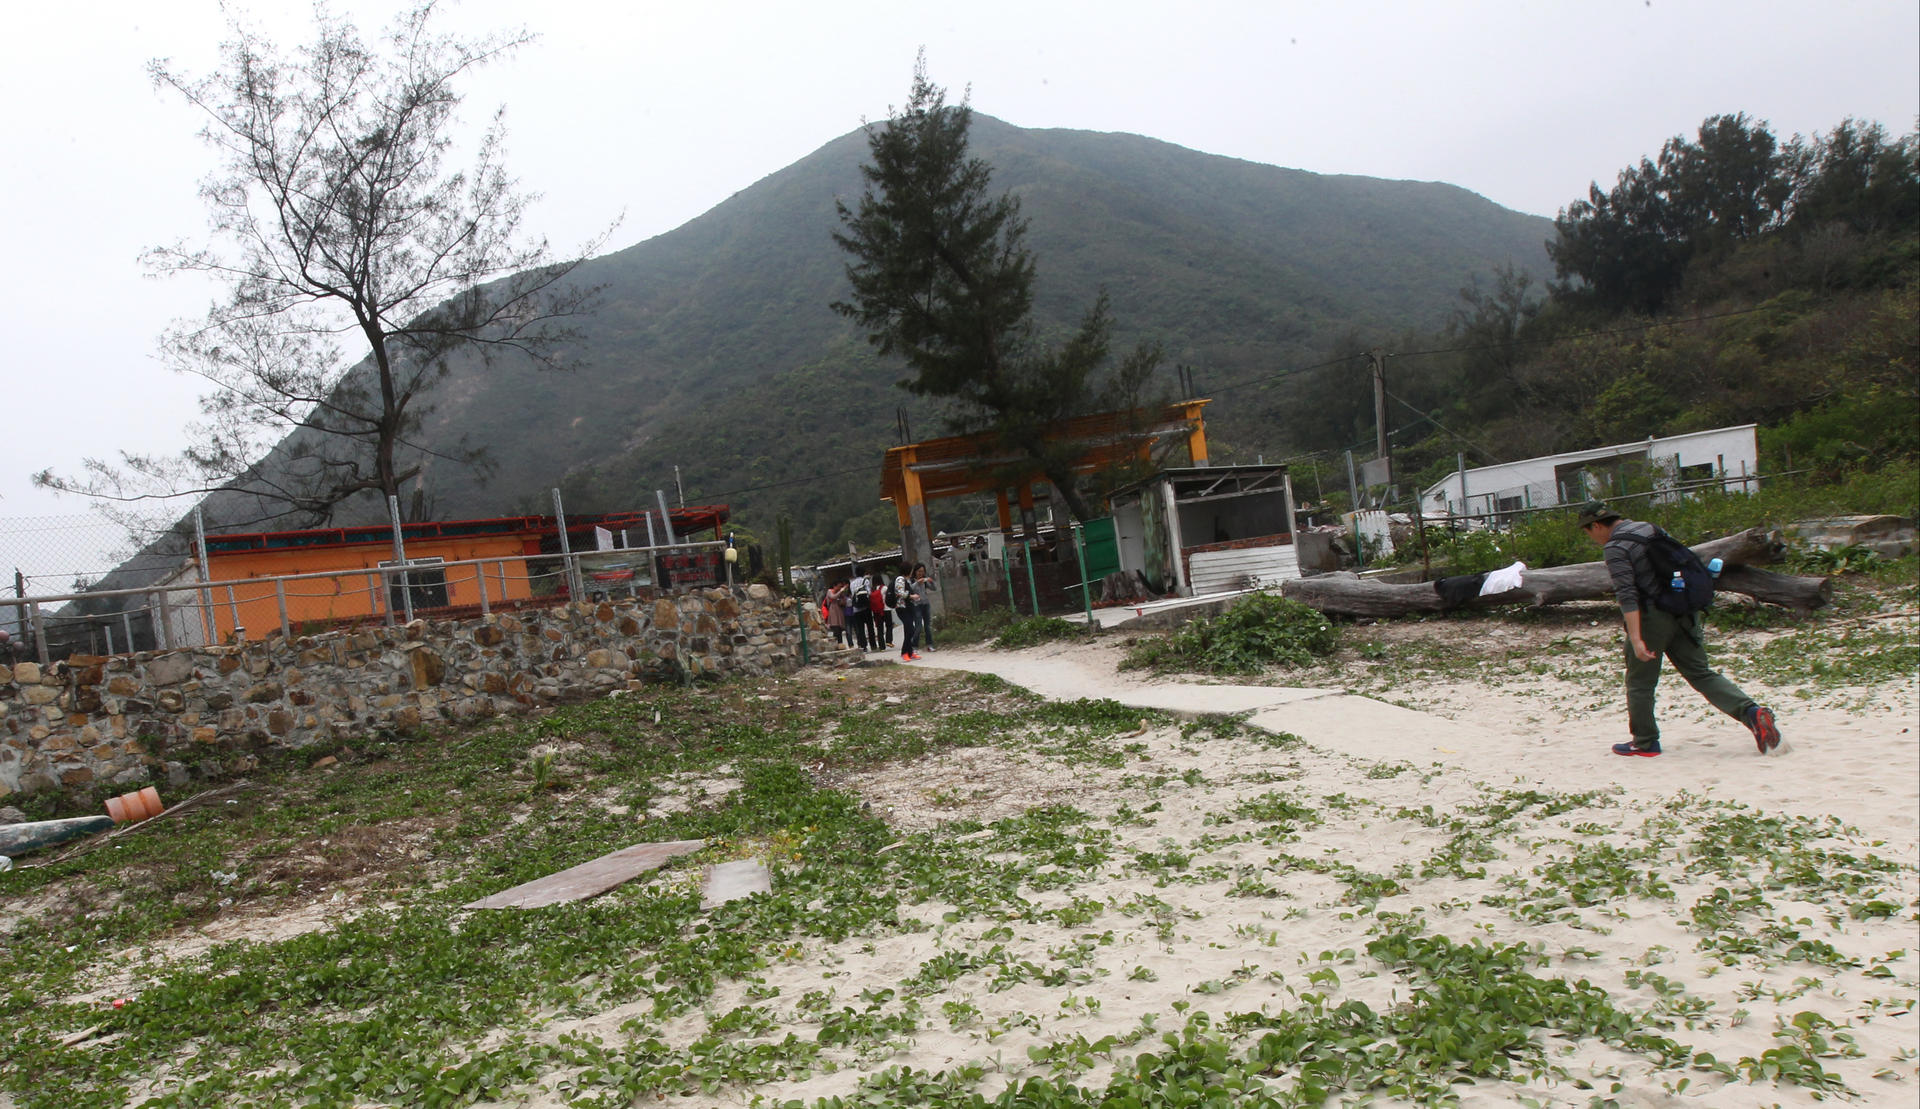 Legislators will decide today whether to designate the 17-hectare Tai Long Sai Wan site as part of the country park. Photo: David Wong